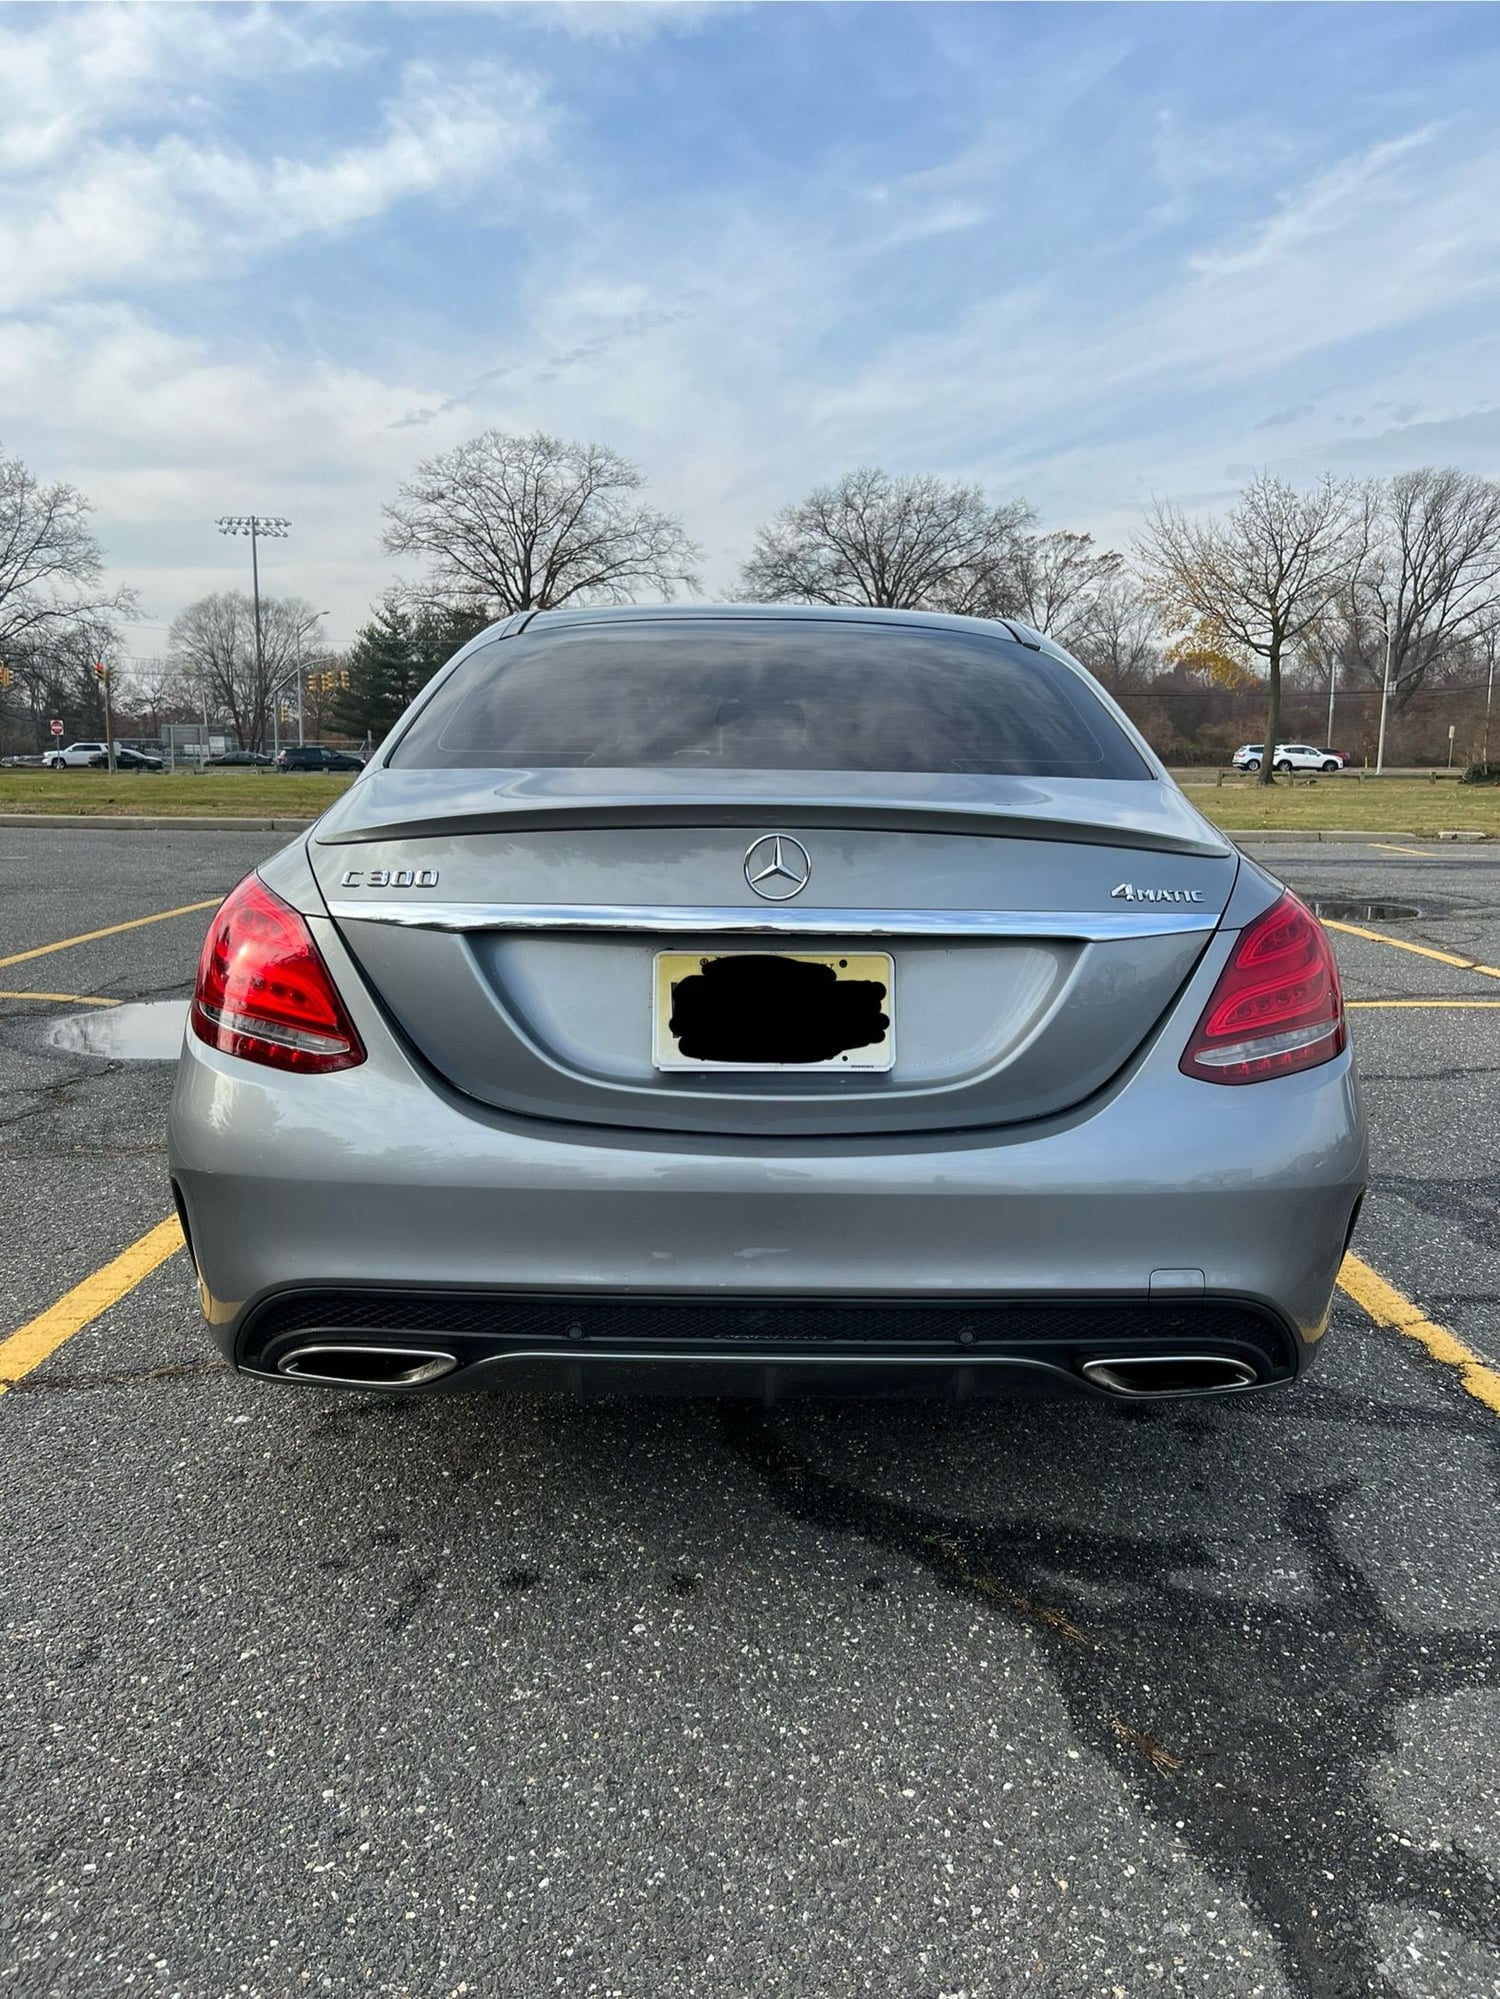 2015 Mercedes-Benz C300 - 2015 Mercedes C300 4Matic - Used - VIN FU086377 - 103,000 Miles - 4 cyl - 4WD - Automatic - Sedan - Gray - Kendall Park, NJ 08224, United States